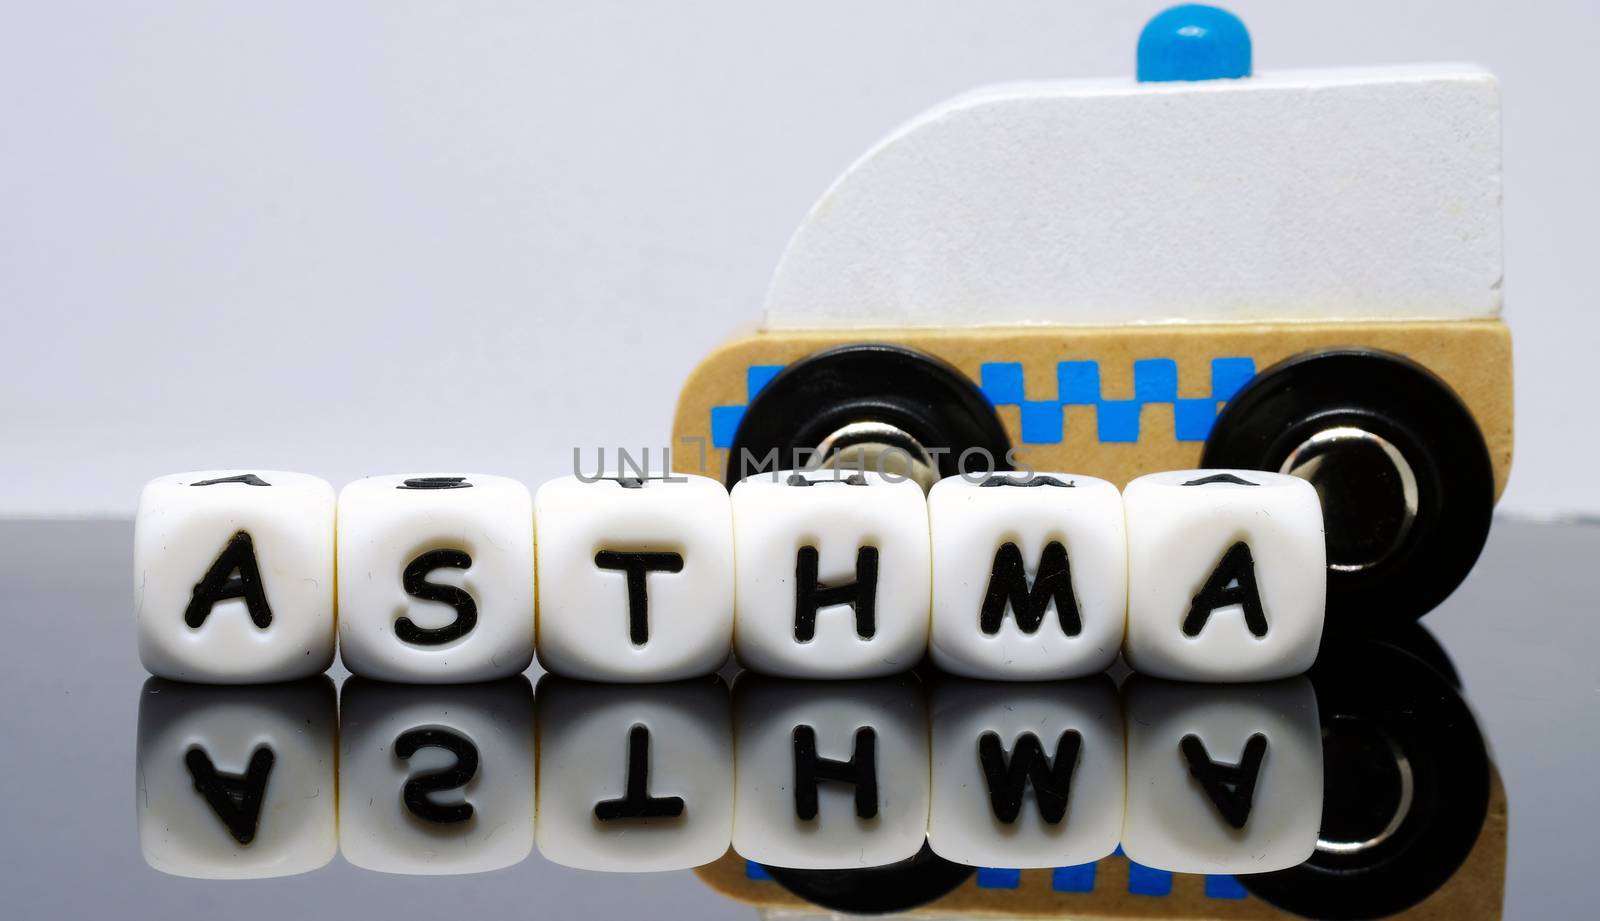 alphabet letters spelling a word asthma, a condition demands urgent medical treatment